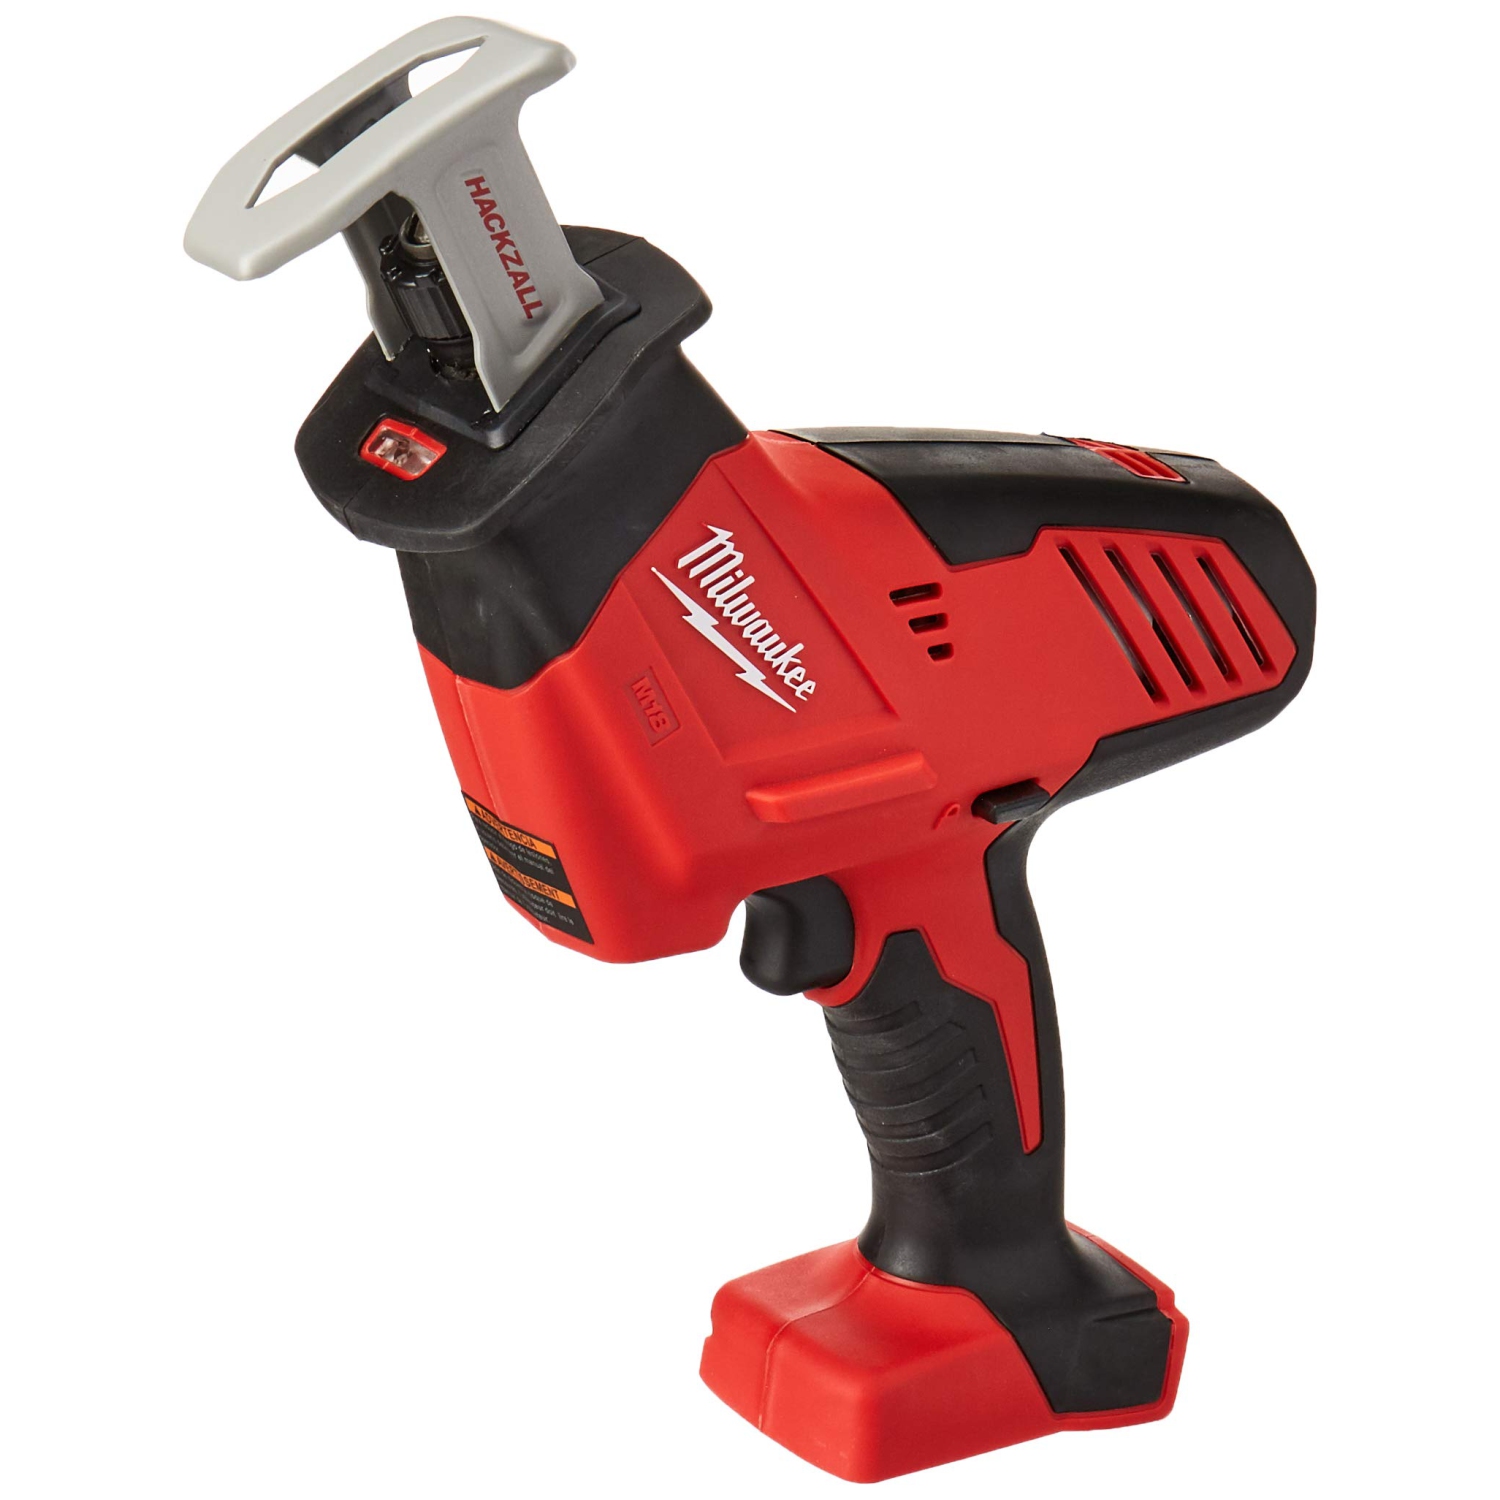 Milwaukee 2625-20 M18 Hackzall 18V Lithium Ion Cordless 3,000 SPM Reciprocating Saw with Anti Vibration Handle and Quik-Lok Blade Changing System